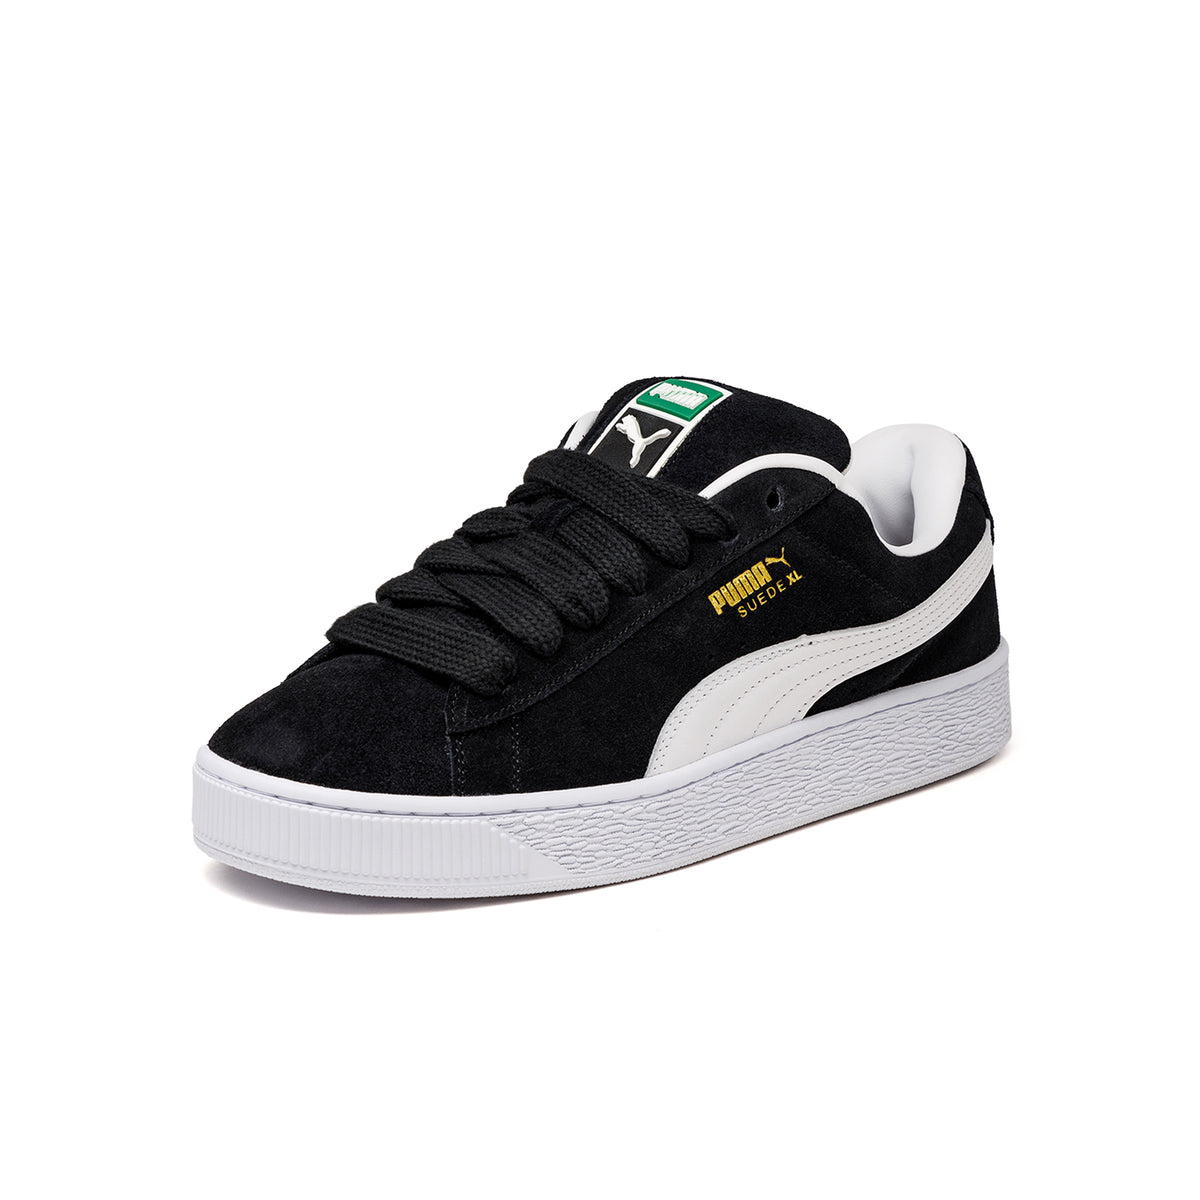 Puma Suede XL – buy now at Asphaltgold Online Store!